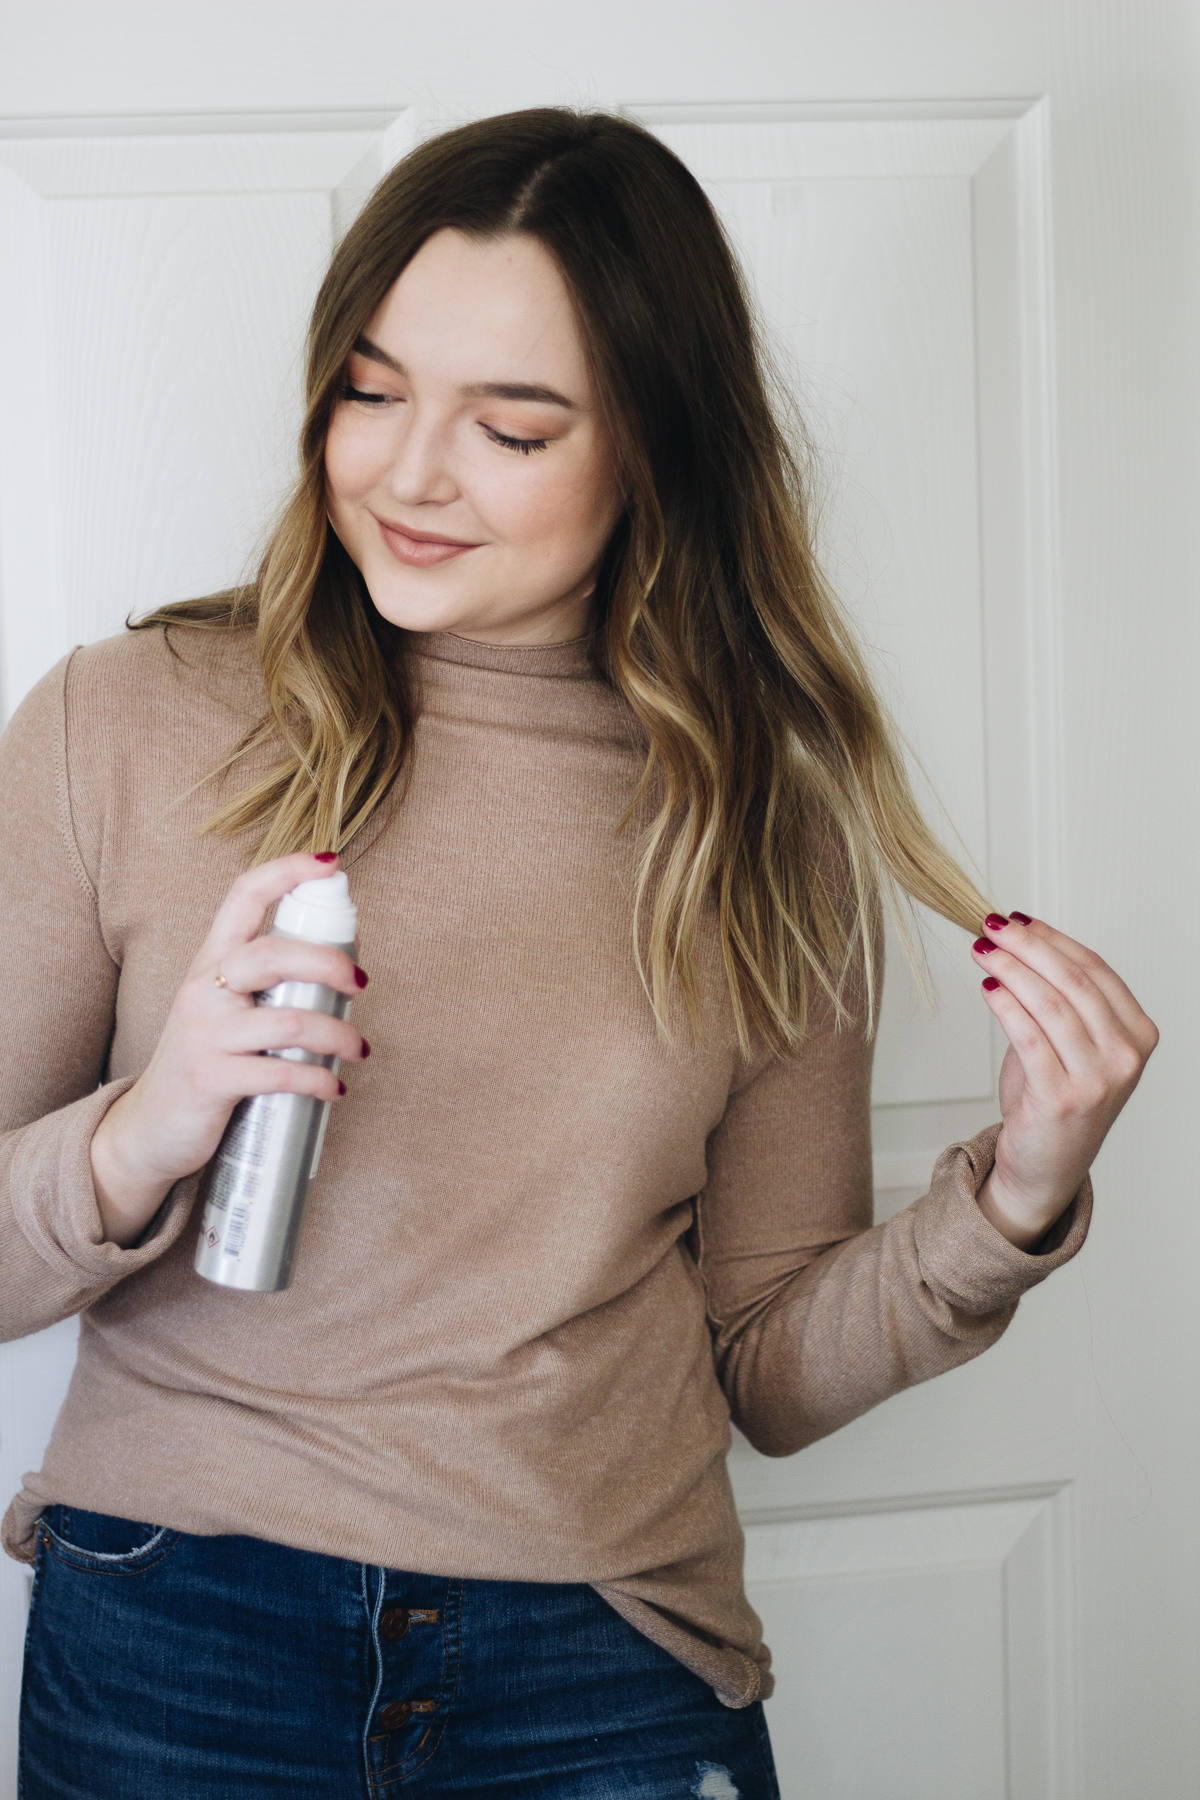 Haircare Essentials: Products Every Girl Needs